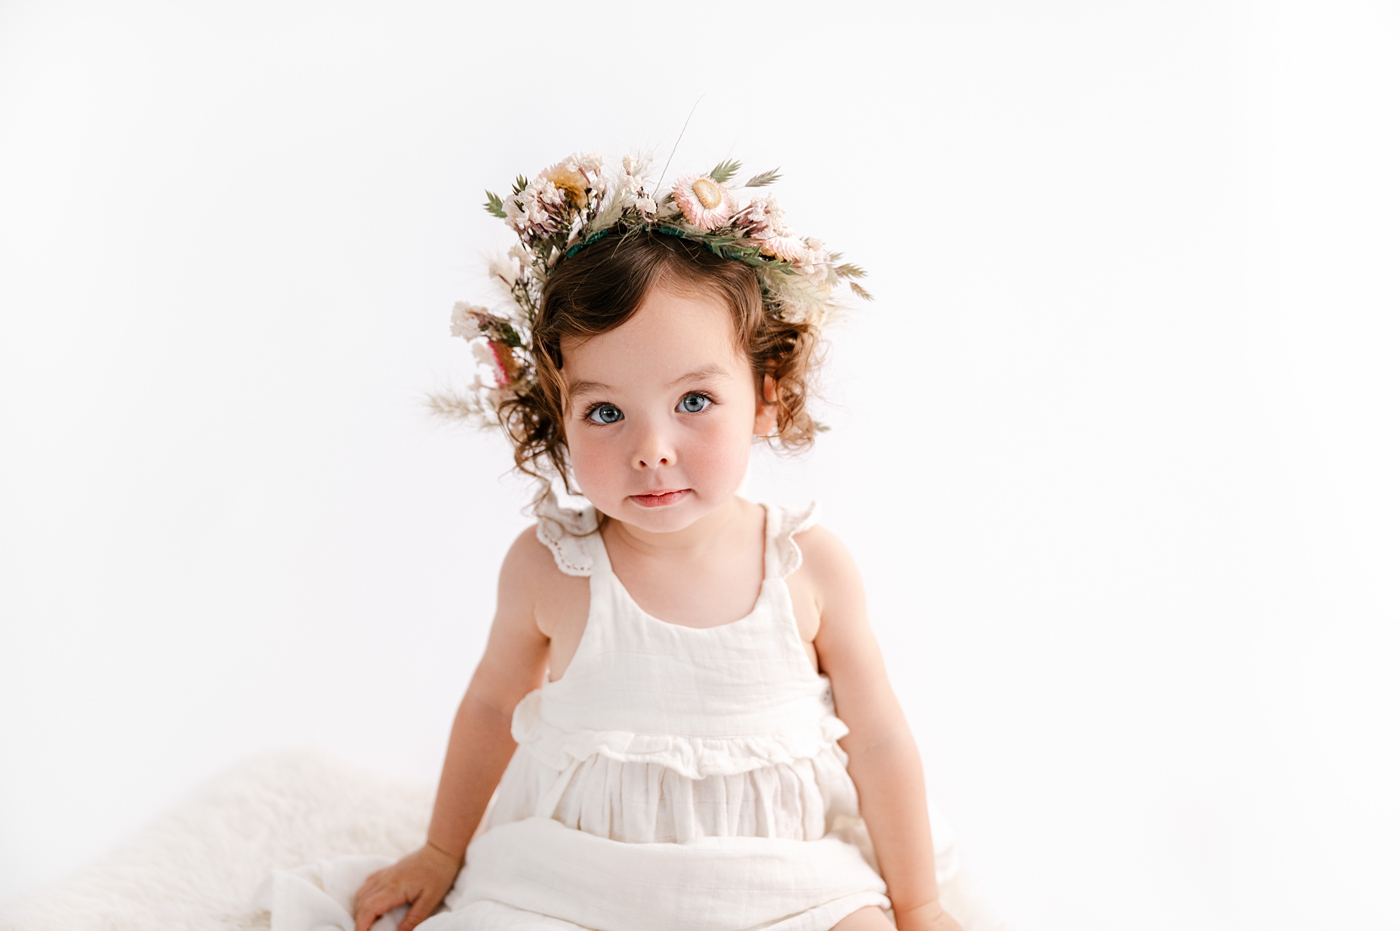 Baby girl in white dress wears floral crown. Photo by Meg Newton Photography.